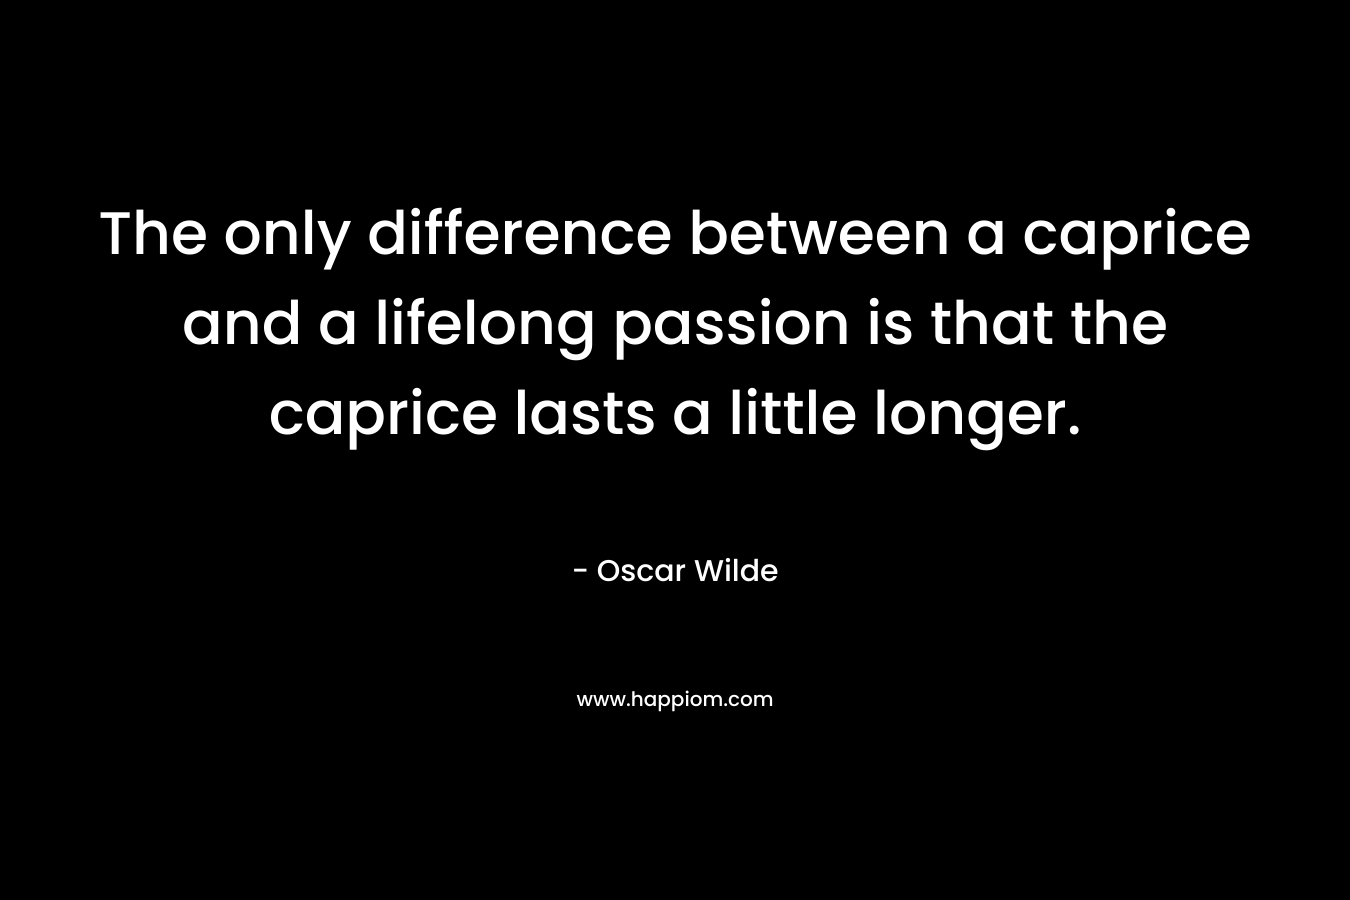 The only difference between a caprice and a lifelong passion is that the caprice lasts a little longer.